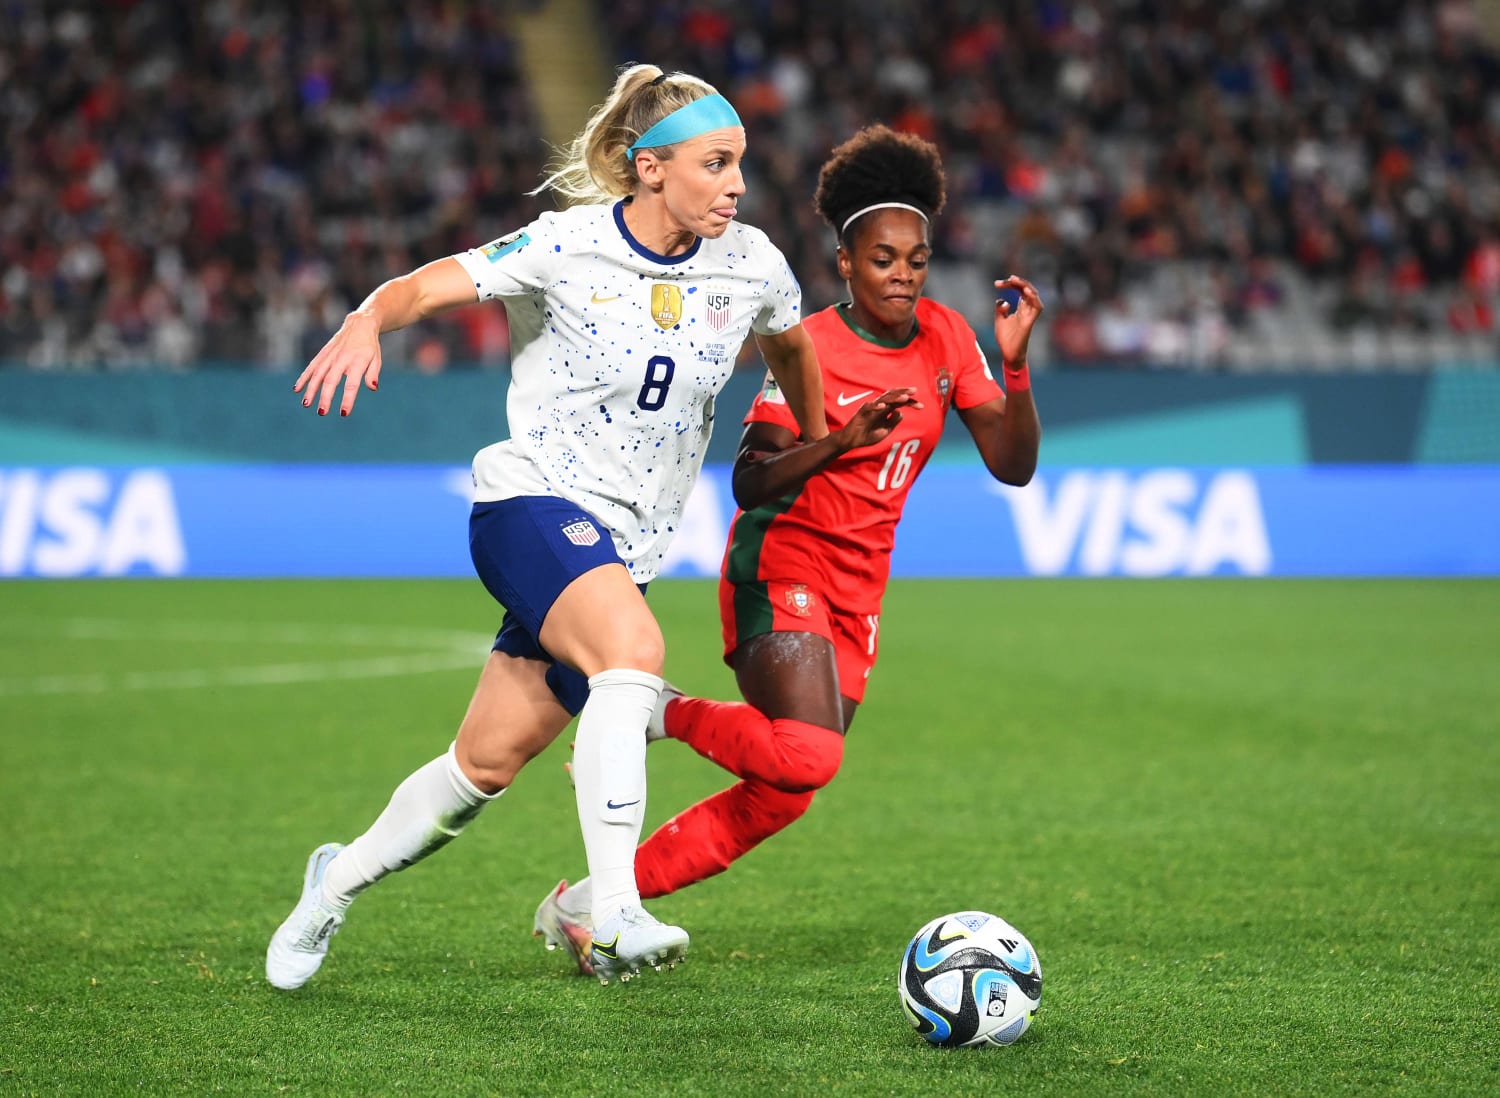 The United States' confrontations with Portugal in the Women's World Cup final: Highlights